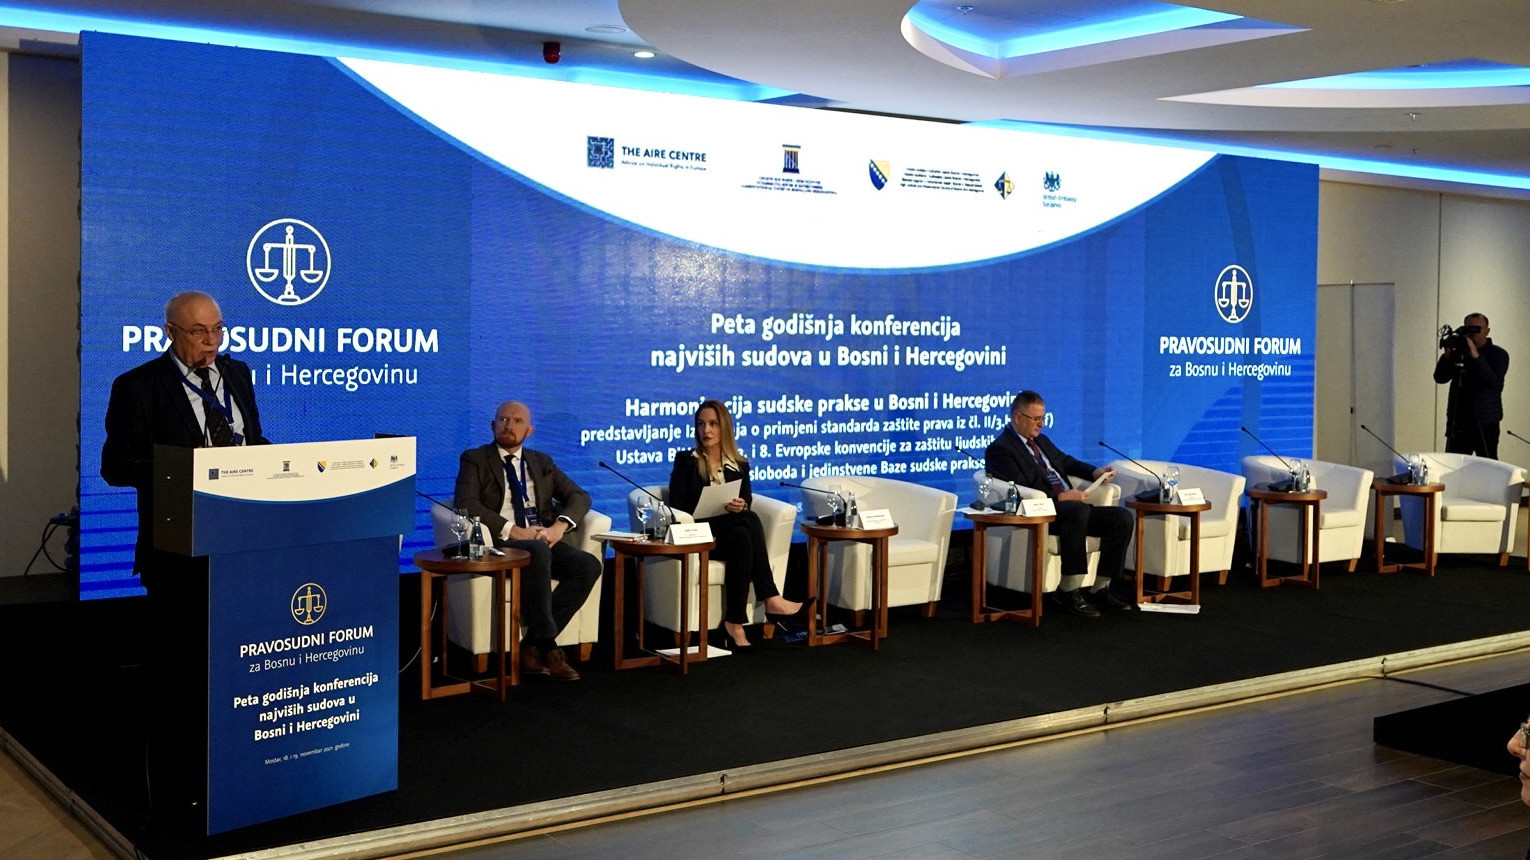 Fifth Annual Conference of the Highest Courts in Bosnia and Herzegovina within Judicial Forum in Bosnia and Herzegovina